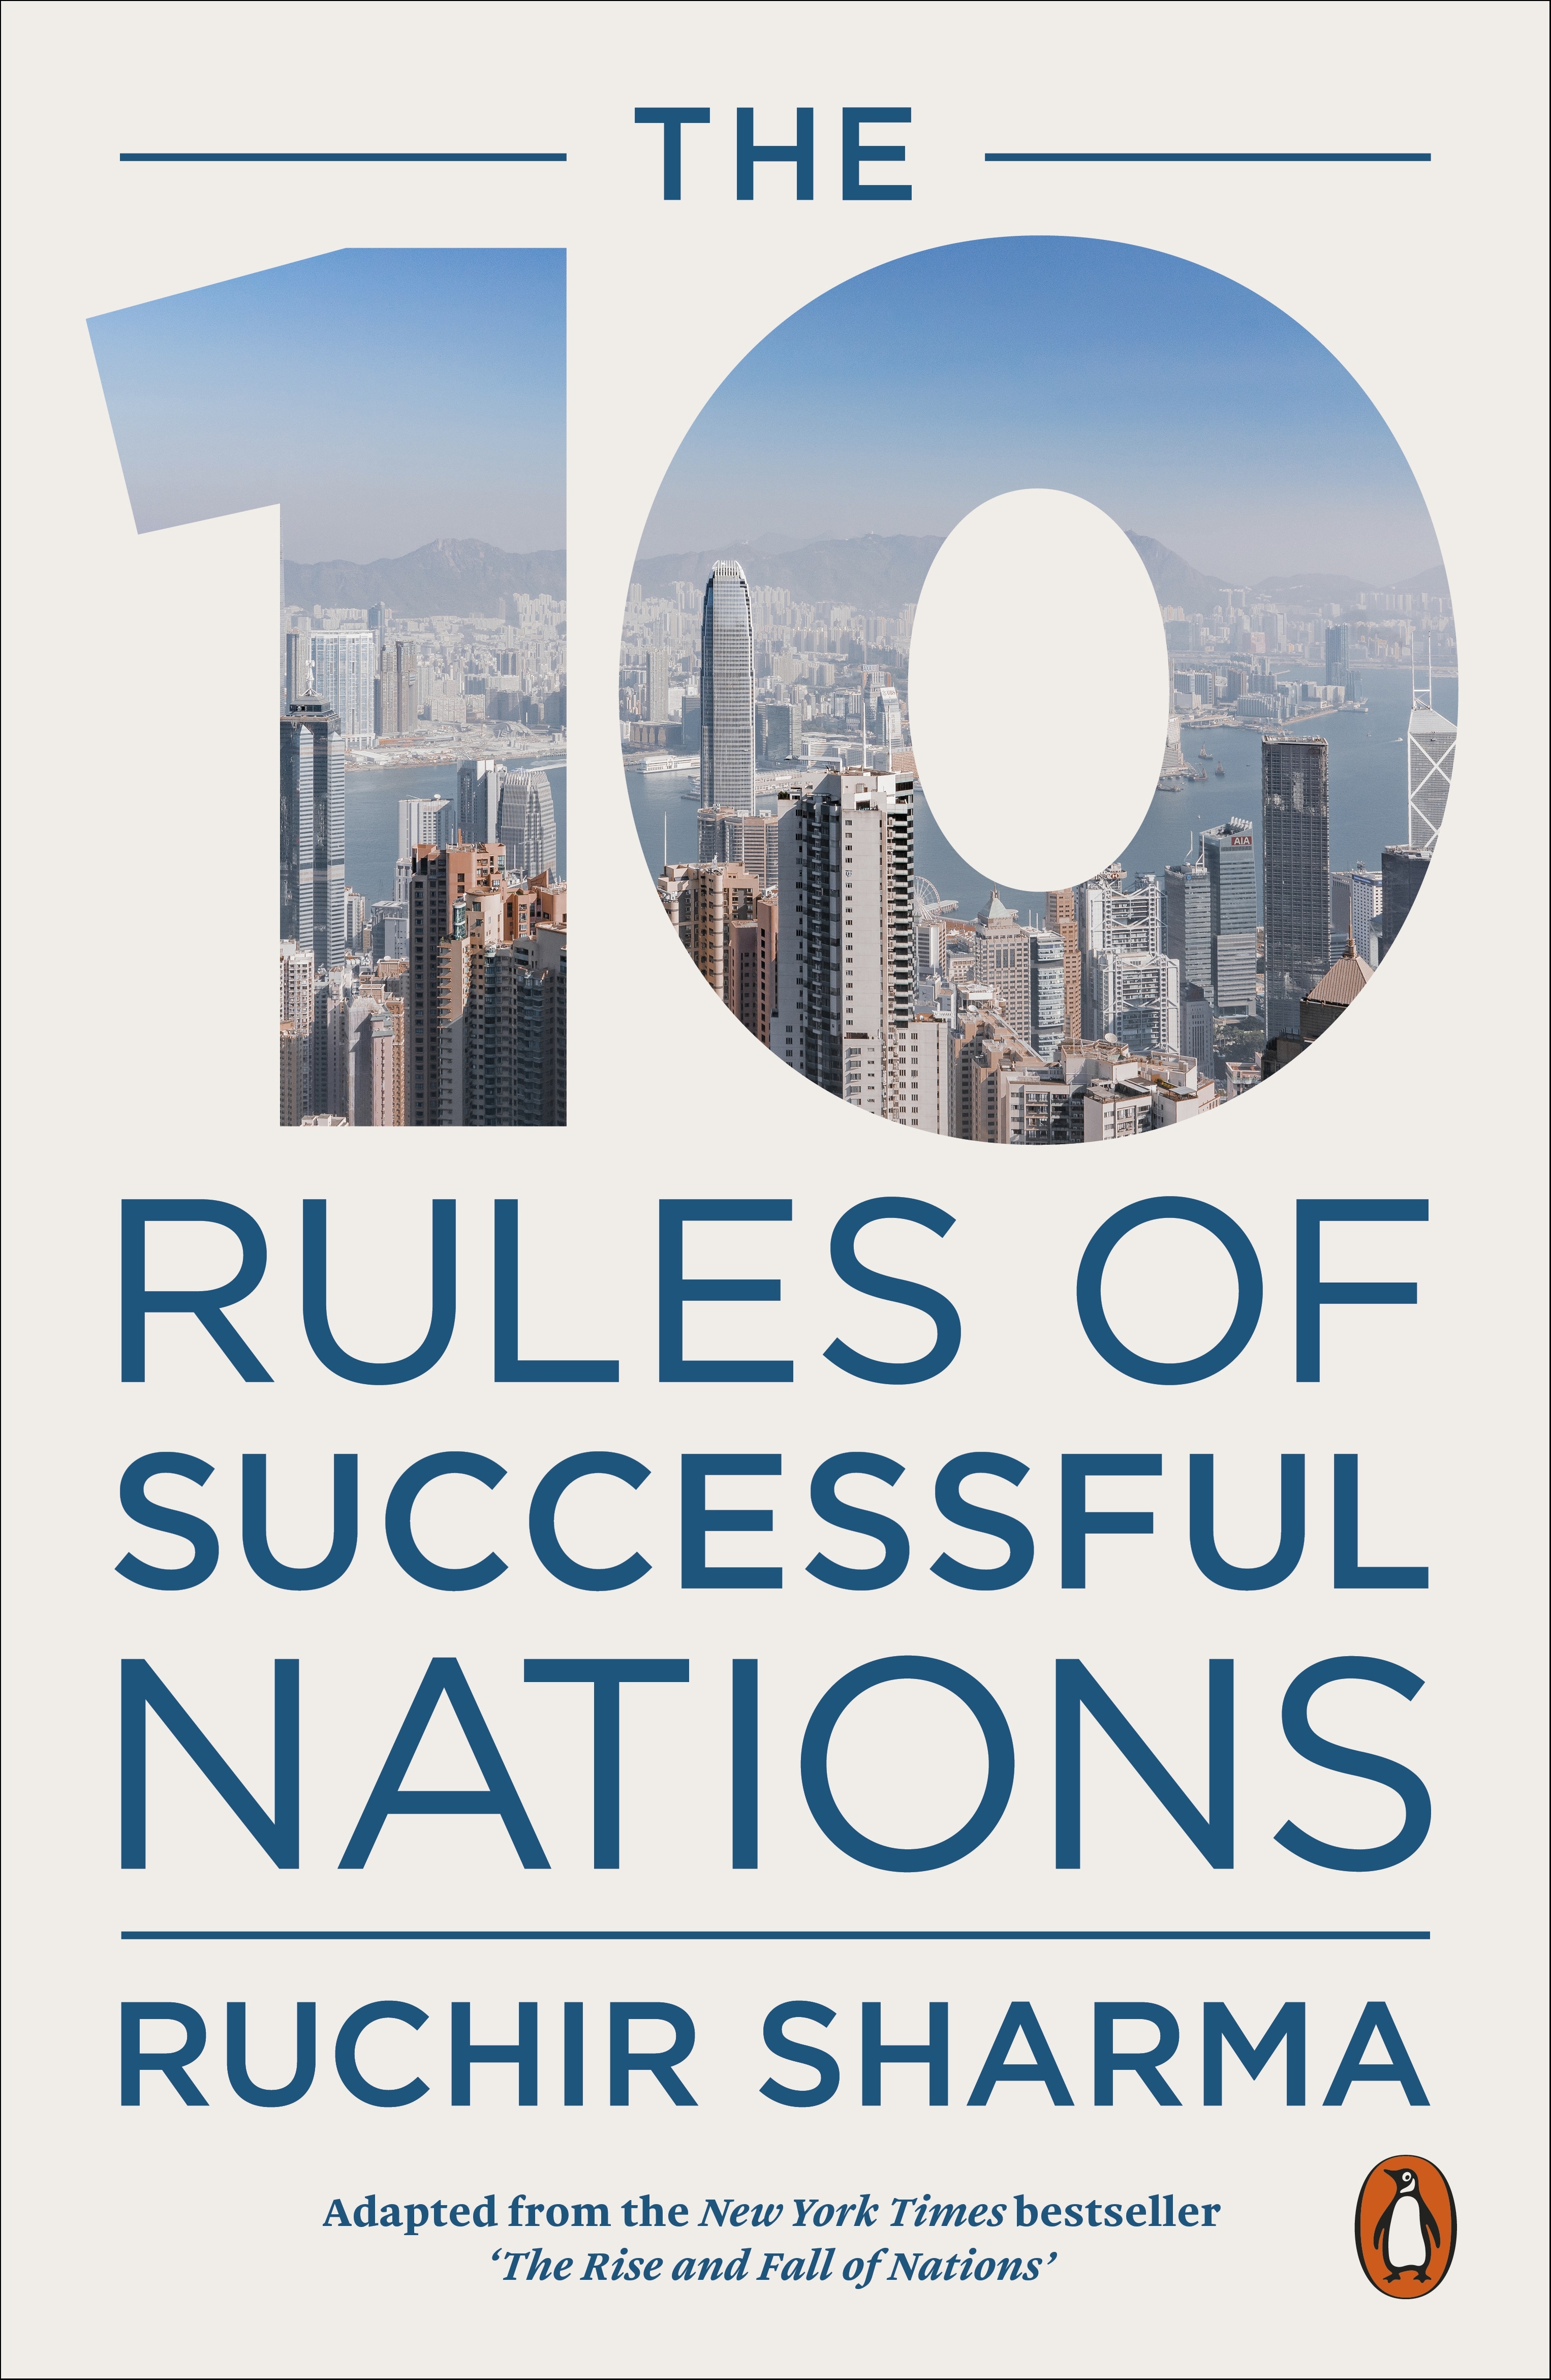 Book “The 10 Rules of Successful Nations” by Ruchir Sharma — April 9, 2020